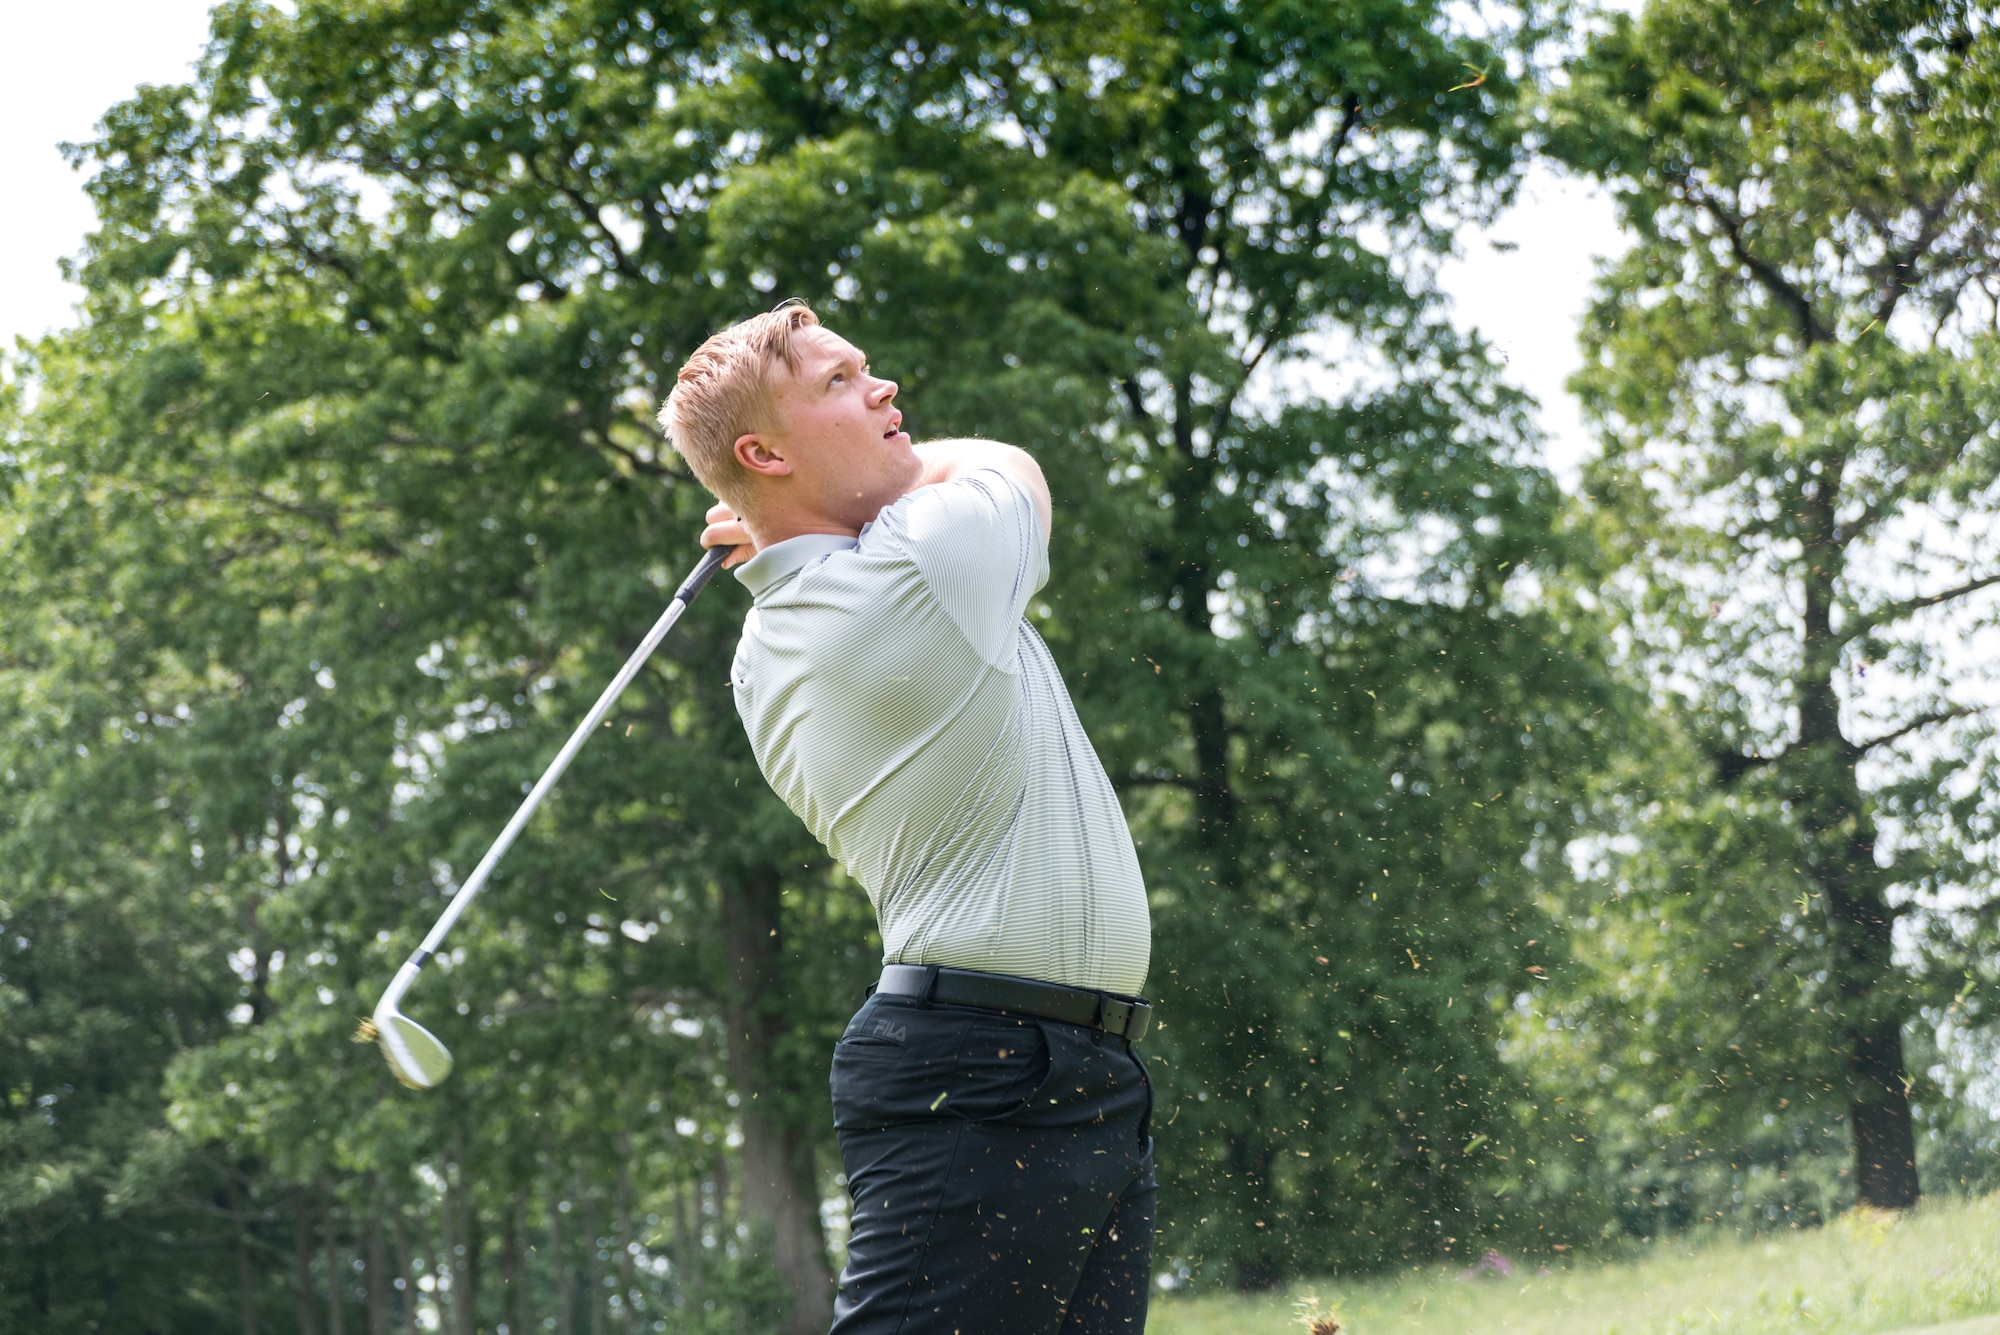 Staff Sgt. Justin Wielock, of the 103rd Civil Engineer Squadron, East Granby, Connecticut, swings his golf club June 1, 2019 at the Bogies for the Brave’s golf tournament at the Hunter Golf Club in Meriden, CT. Wielock sliced the grass with his swing and pushed the gold ball through the air and onto the green. The tournament was hosted by the non-profit organization Bogies for the Brave. (U.S. Air National Guard photo by Airman 1st Class Chanhda Ly)